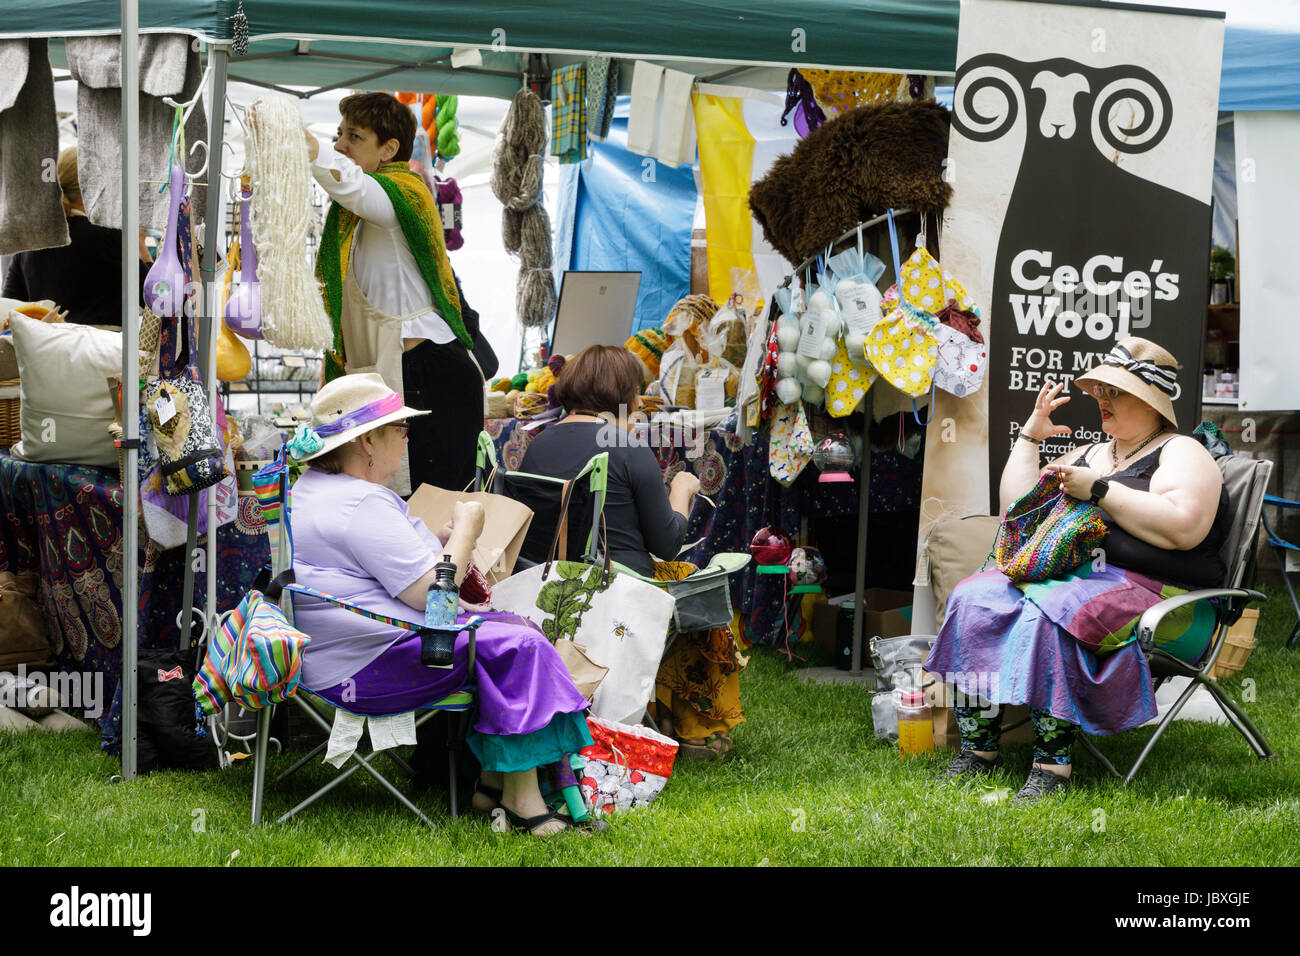 SHARON SPRINGS, NY, USA - MAY 27 2017: Hand made products and crafts for sale at the annual Garden Party Craft Fair. Stock Photo